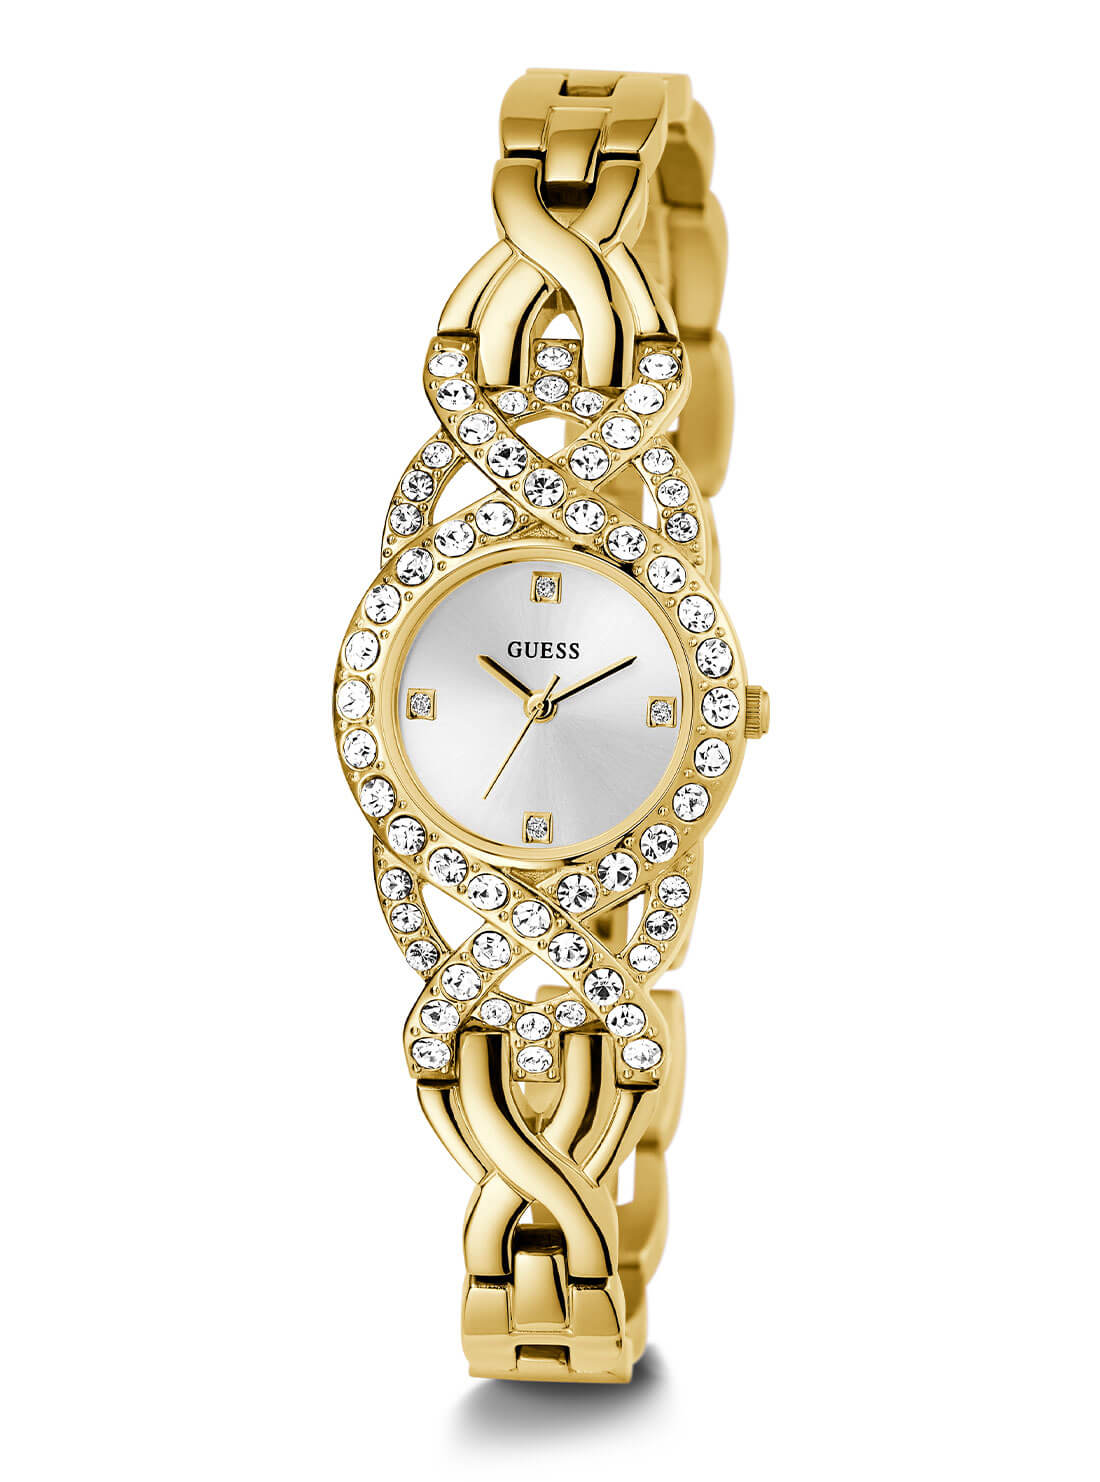 GUESS Gold Adorn Crystal Watch front view